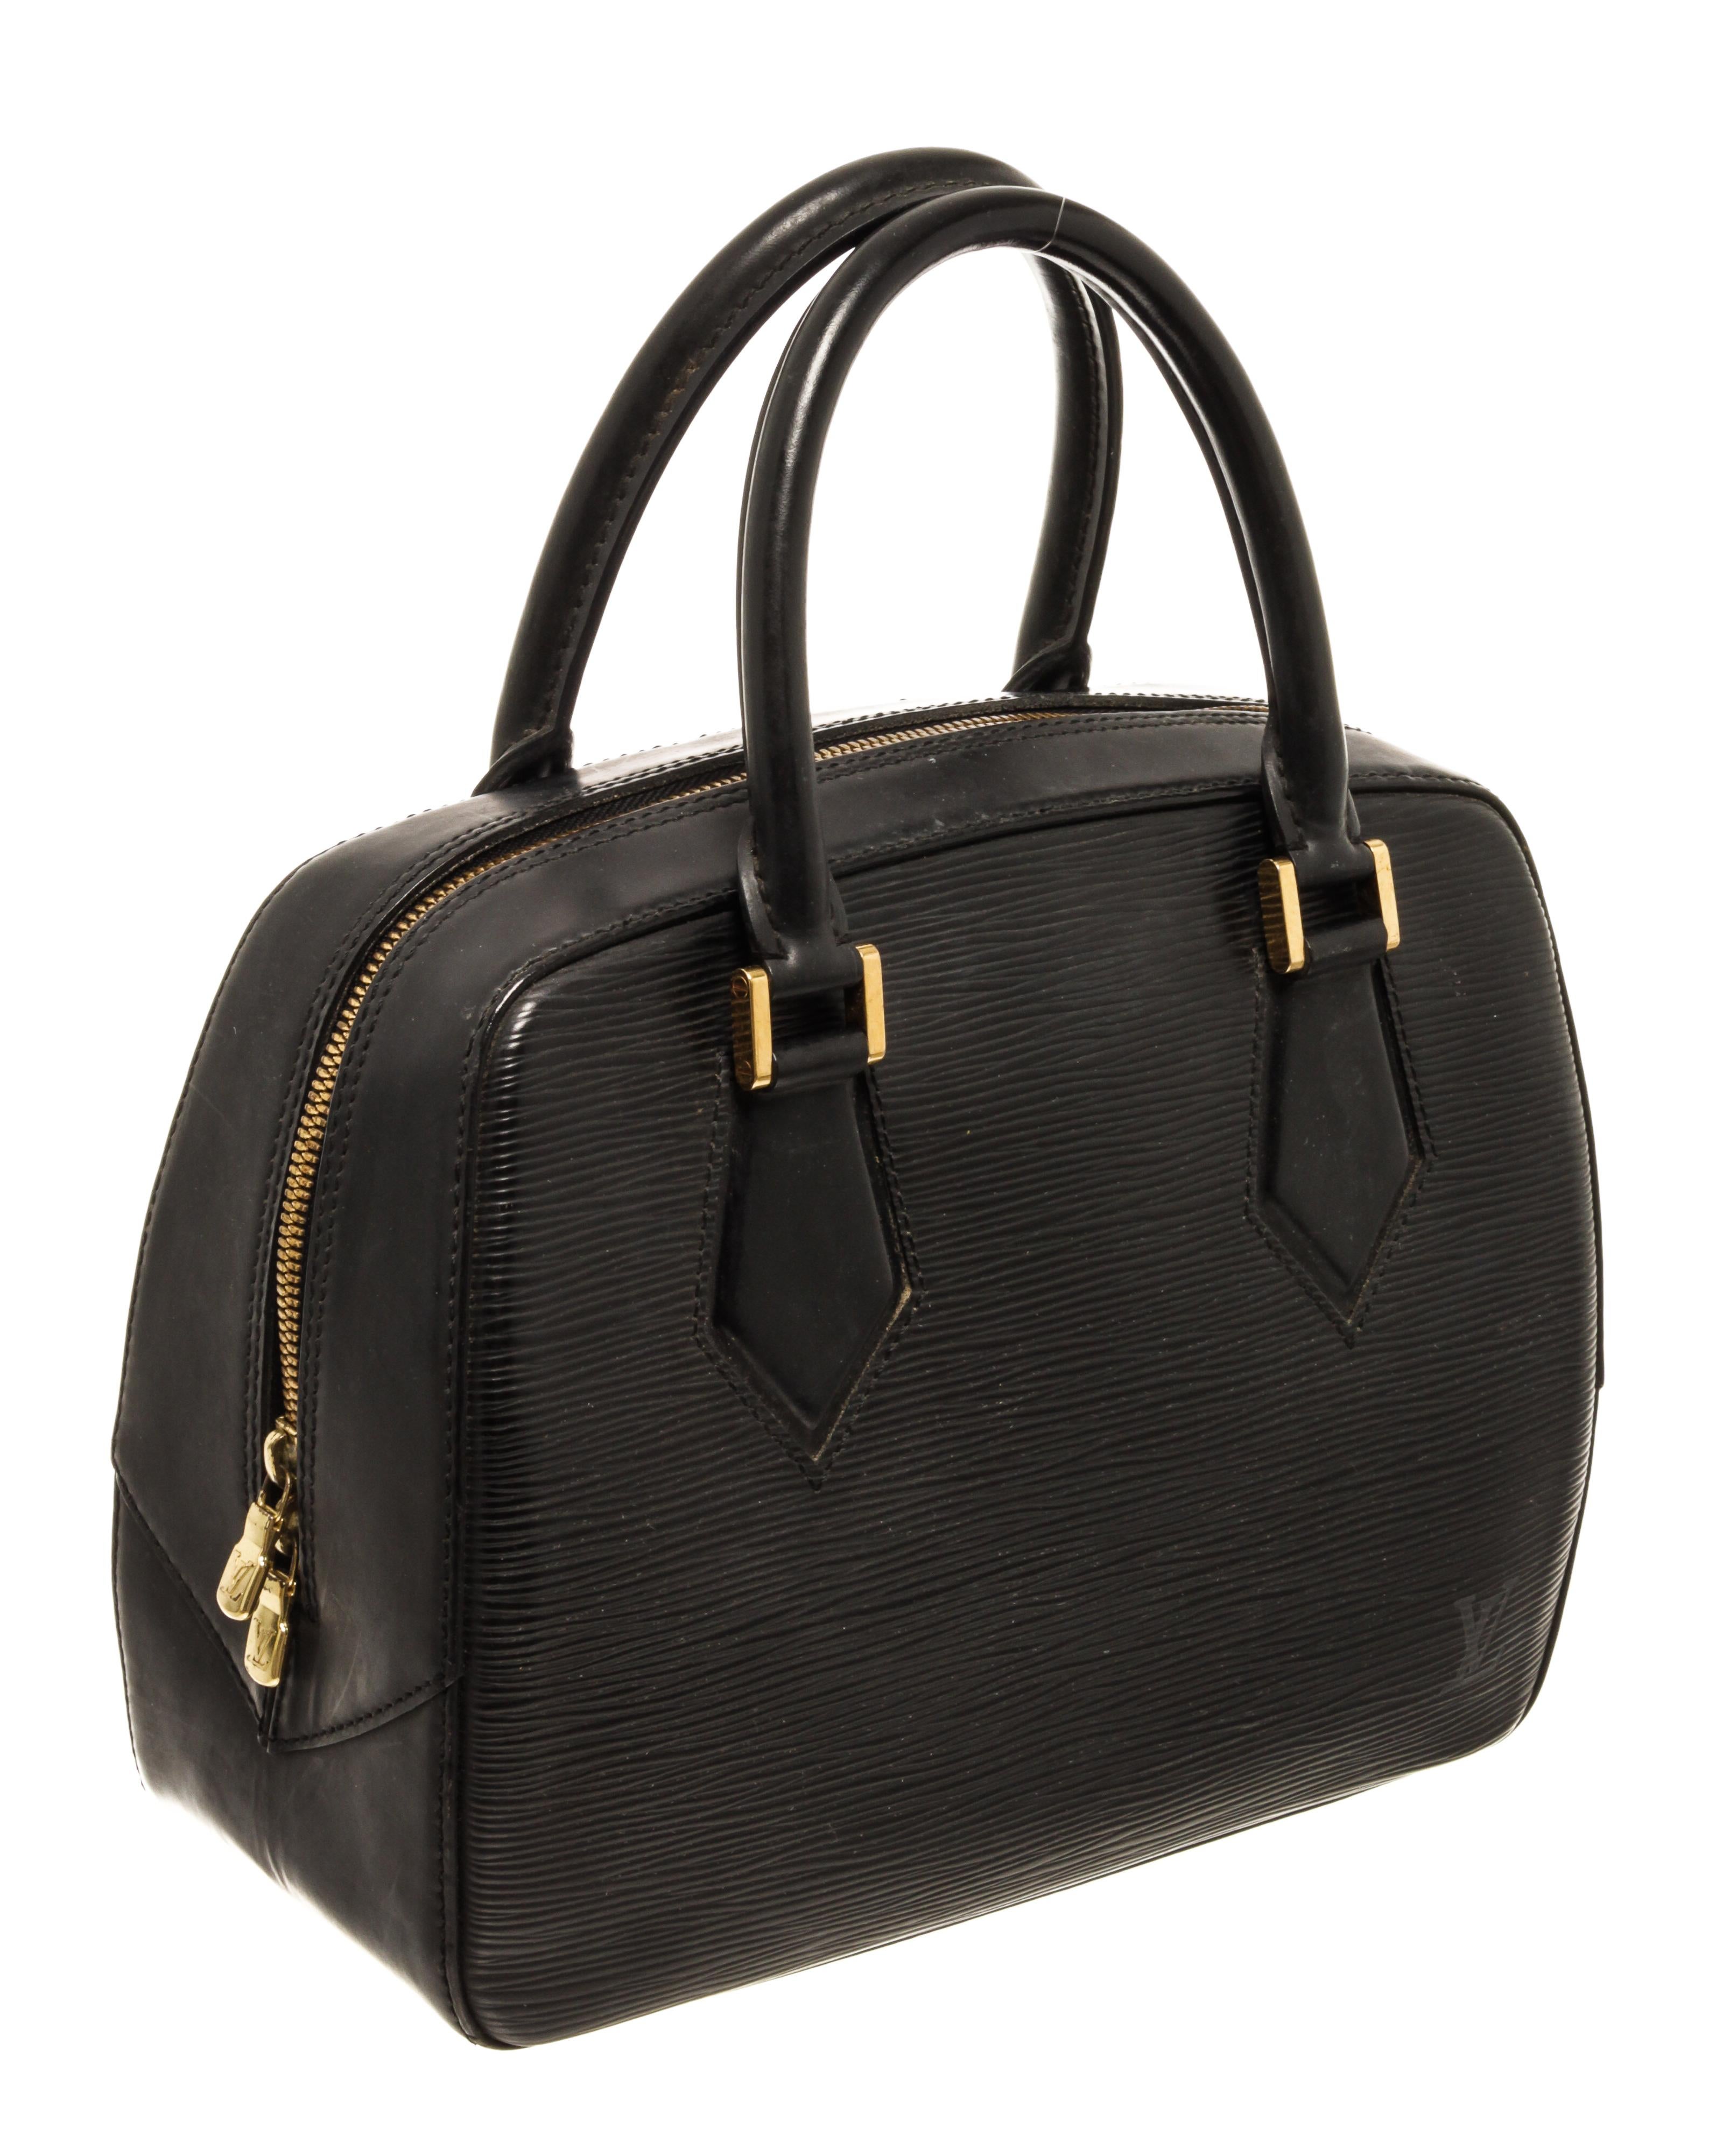 This sophisticated tote is finely crafted of Louis Vuitton signature textured black epi leather. The bag features thin and sturdy rolled leather top handles with squared brass links, and a wrap around zipper. This handbag opens to a alcantara